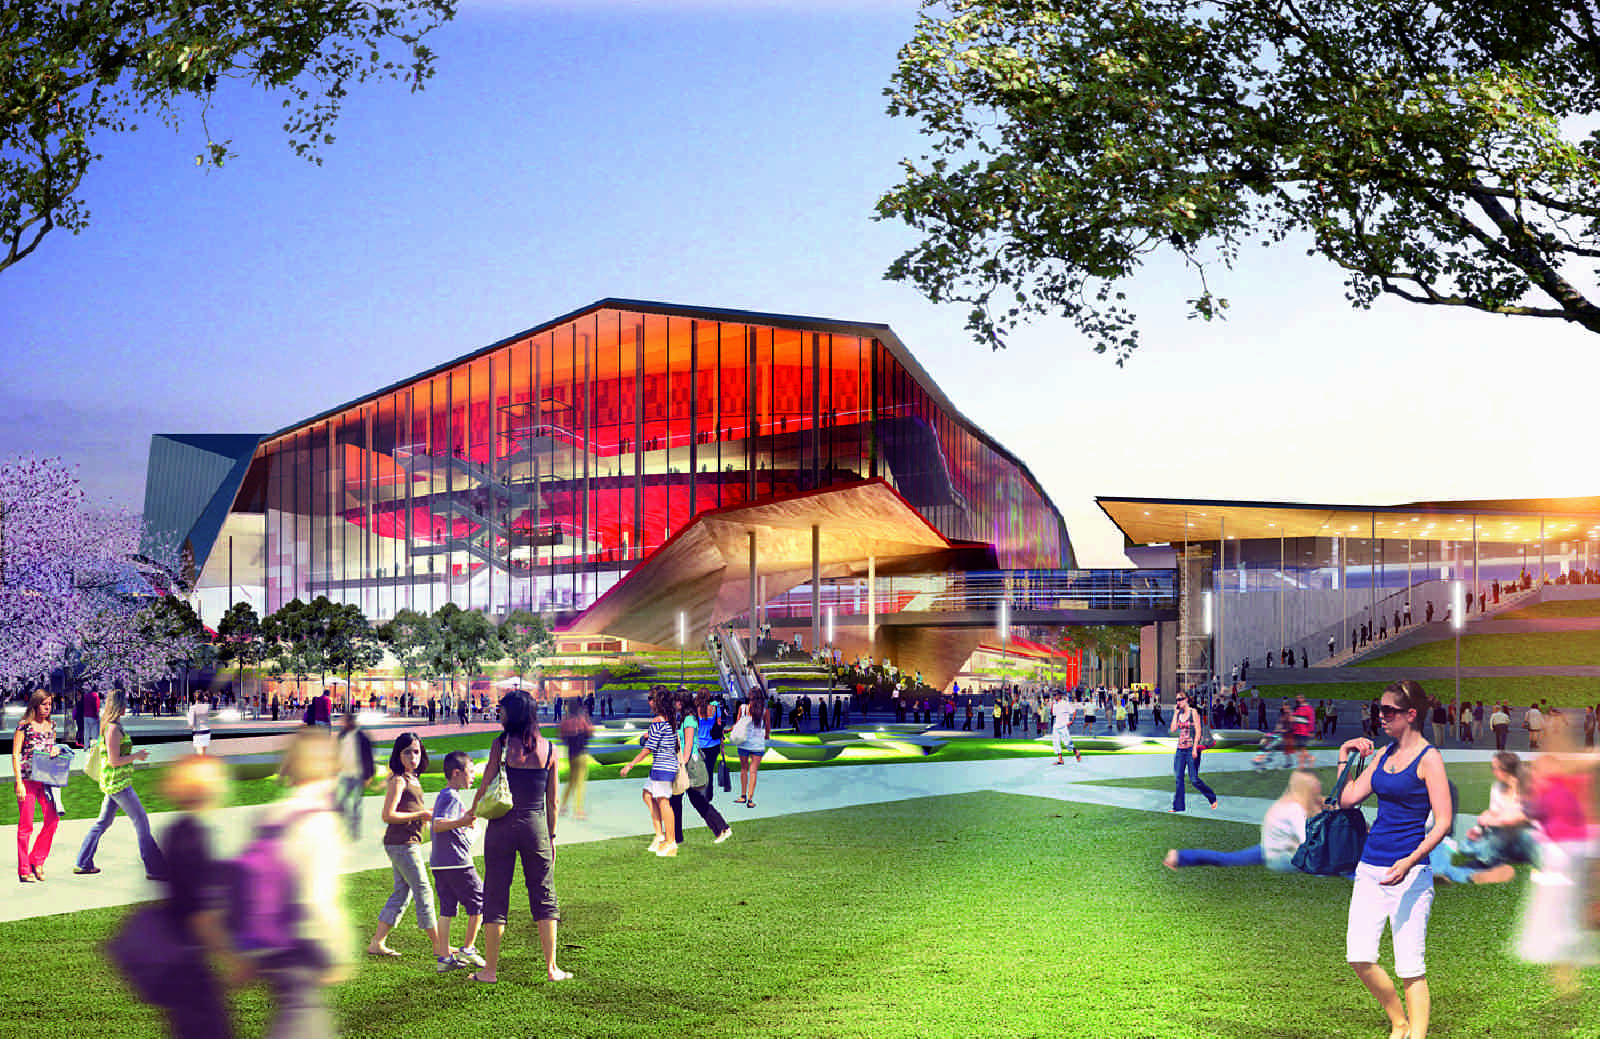 Sydney Nuovo Galles del Sud, Australia: [NEW CONVENTION, EXHIBITION AND ENTERTAINMENT PRECINCT BY HASSELL + POPULOUS]